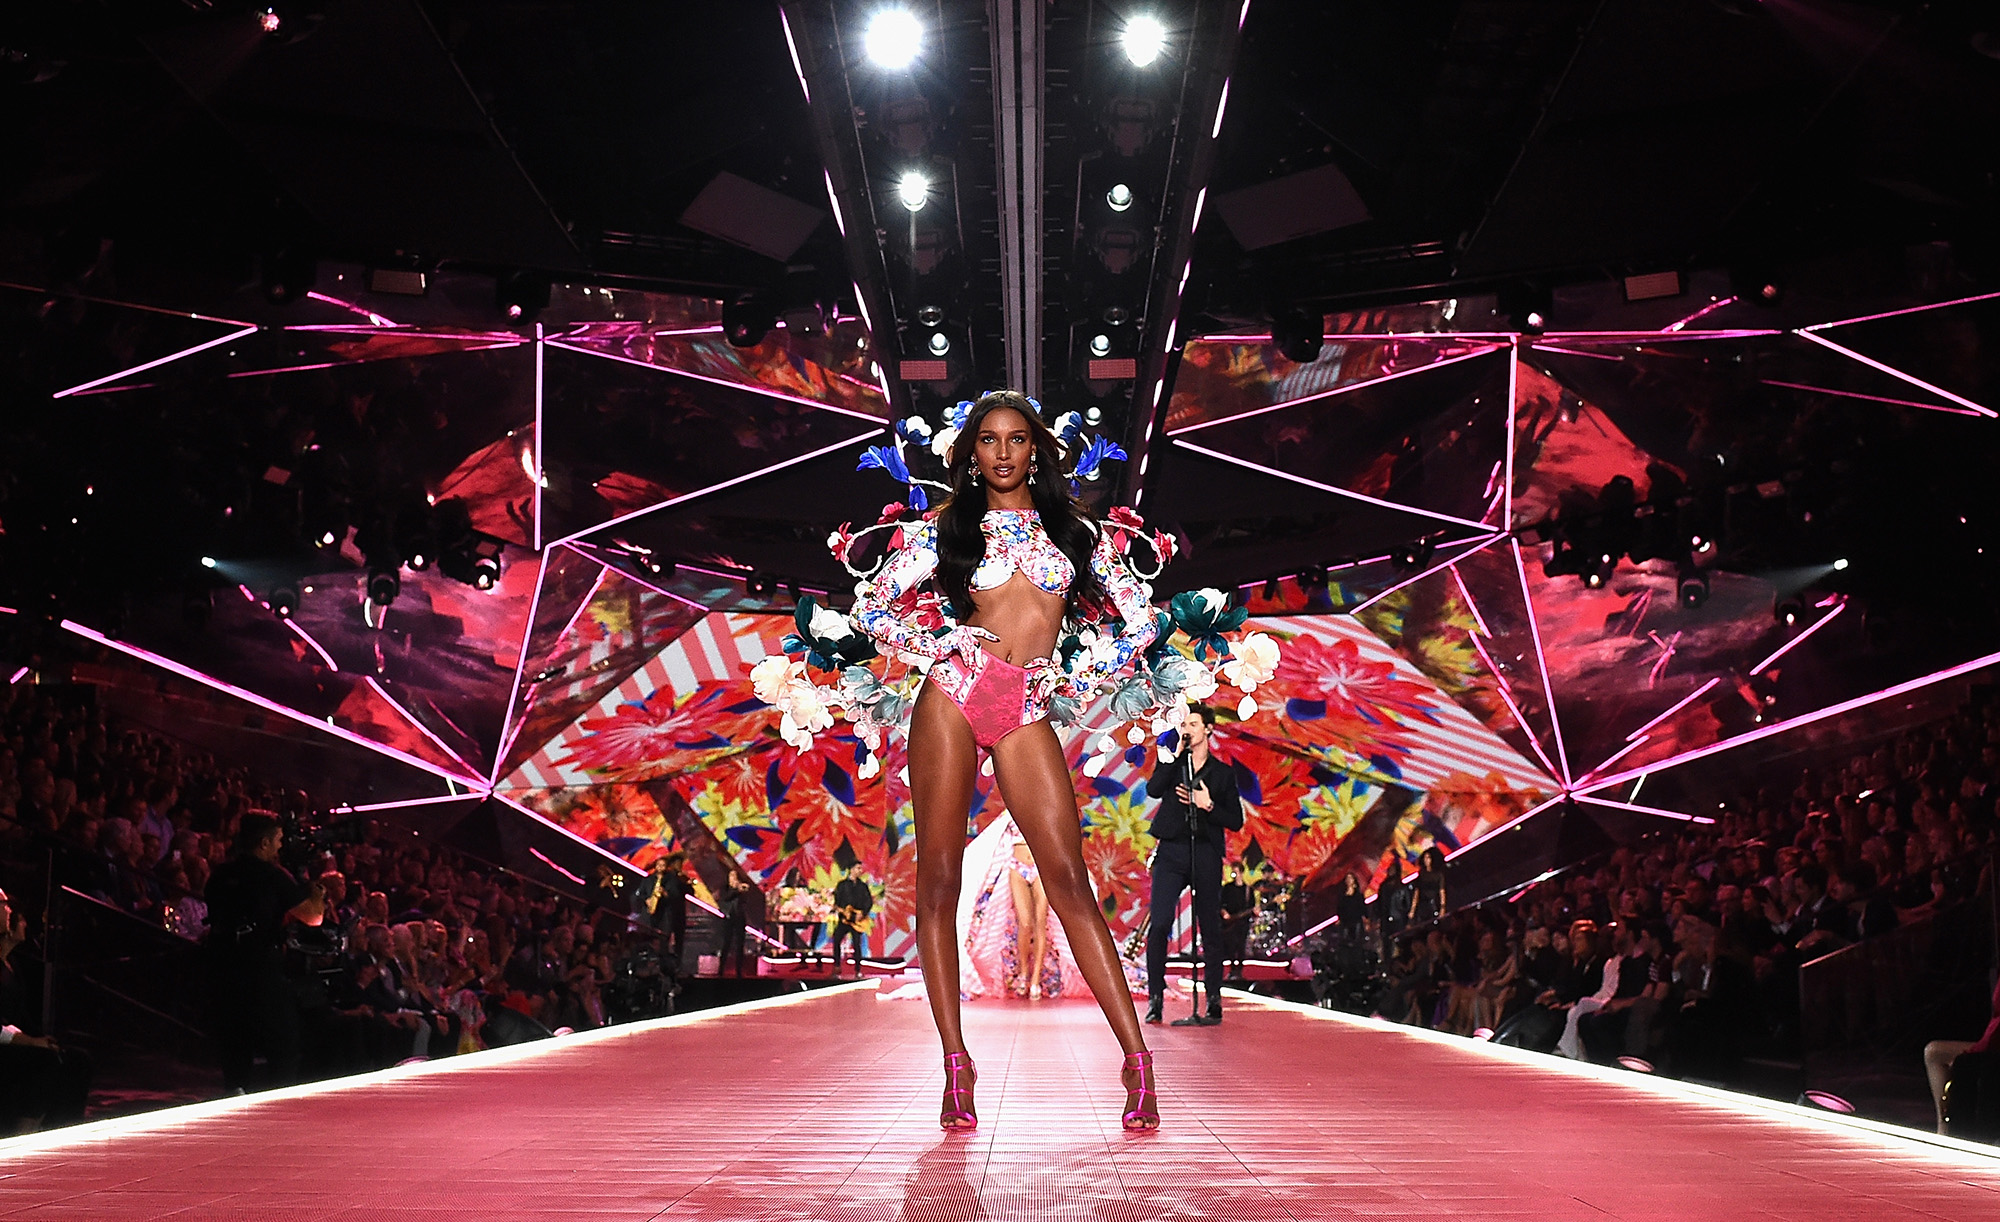 The rise and fall of the Victoria's Secret's Angels models